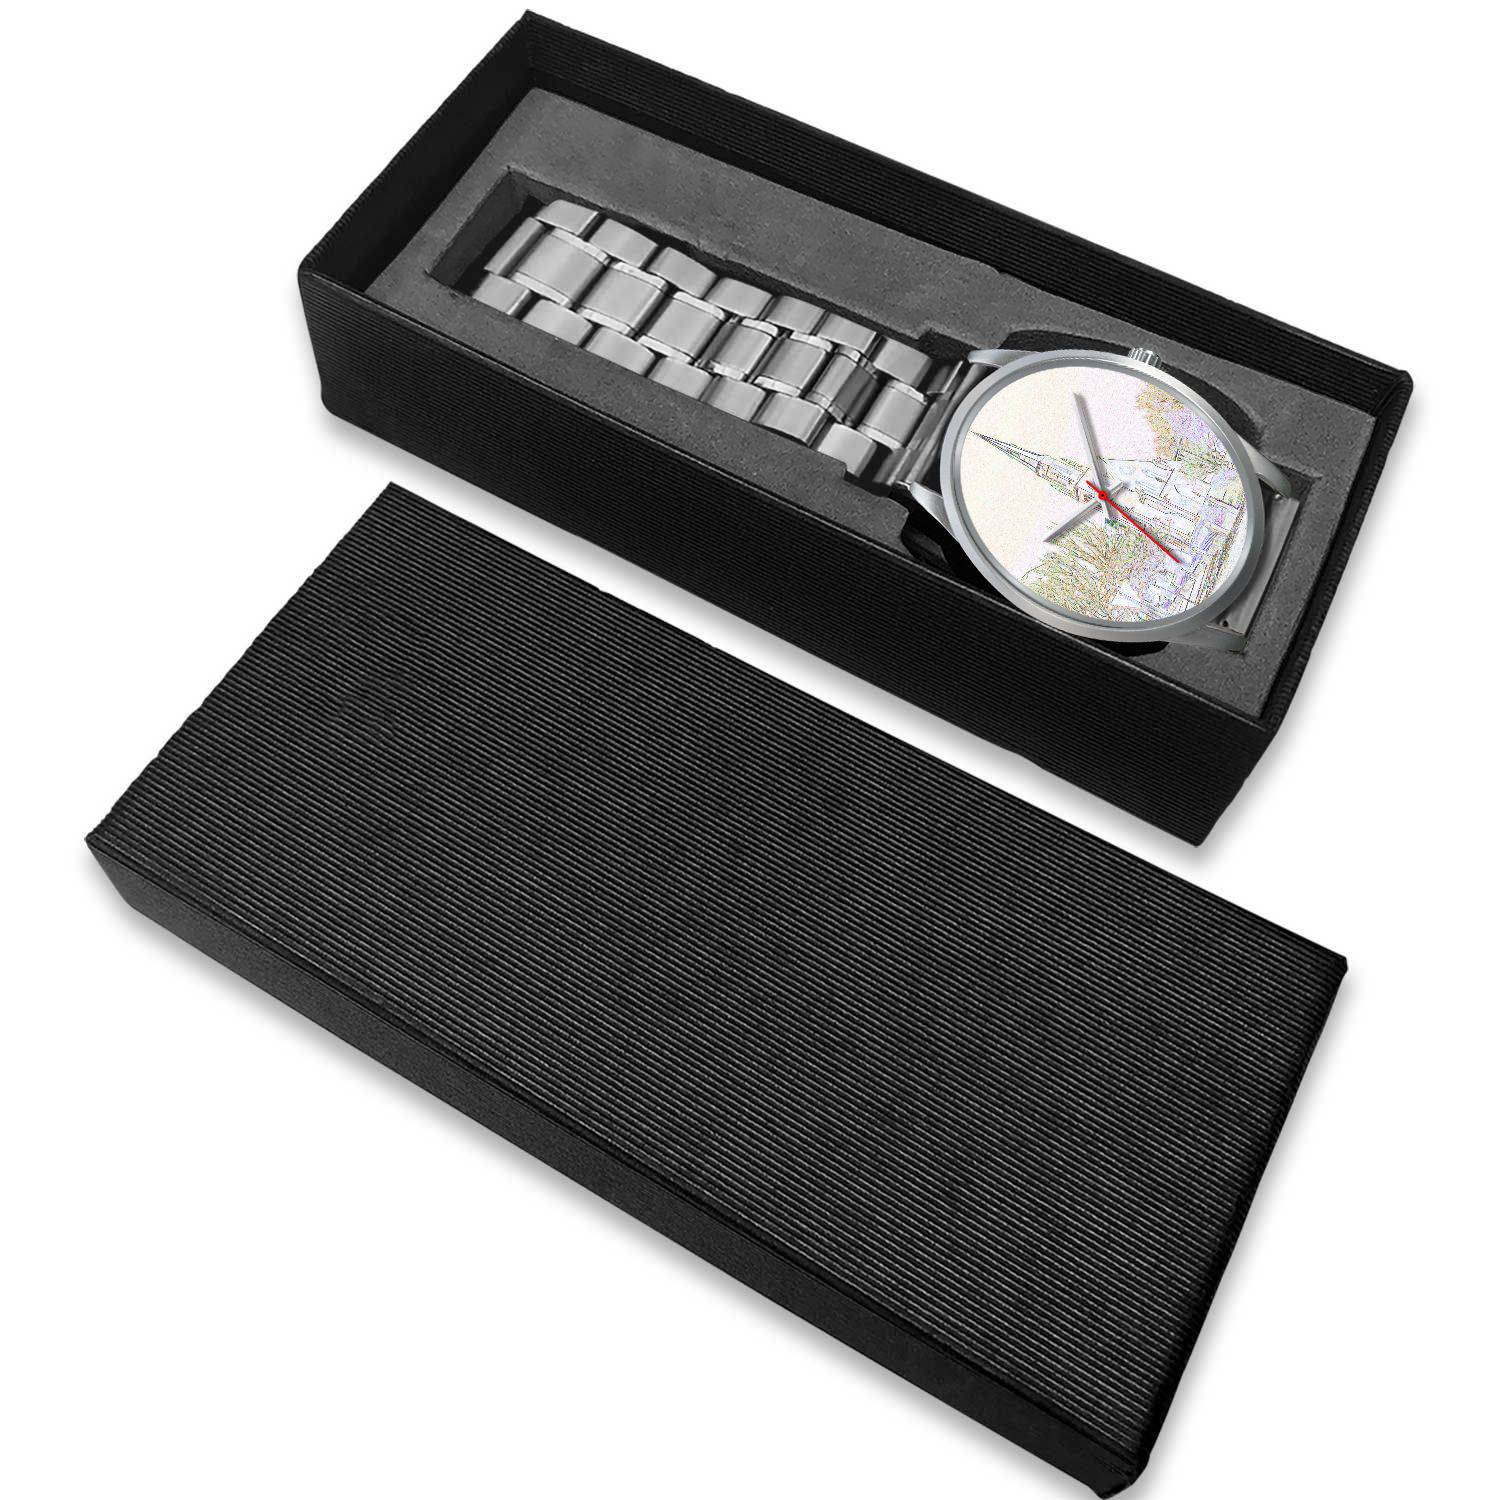 SILVER WATCH - WHITE CHAPEL - LIVINGARTLIFESTYLE